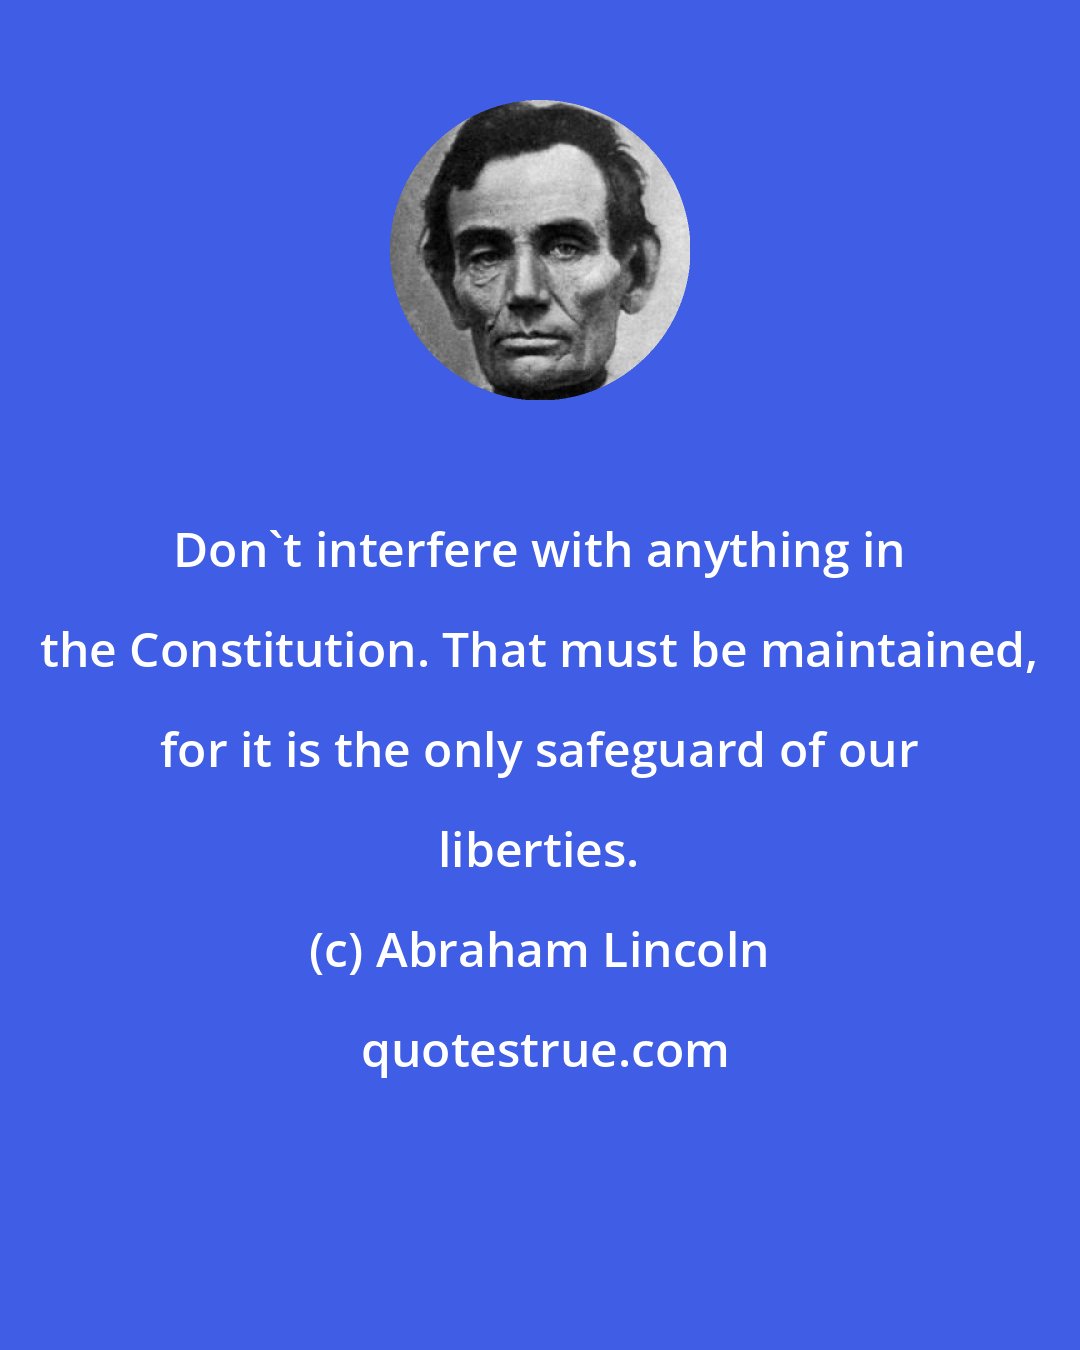 Abraham Lincoln: Don't interfere with anything in the Constitution. That must be maintained, for it is the only safeguard of our liberties.